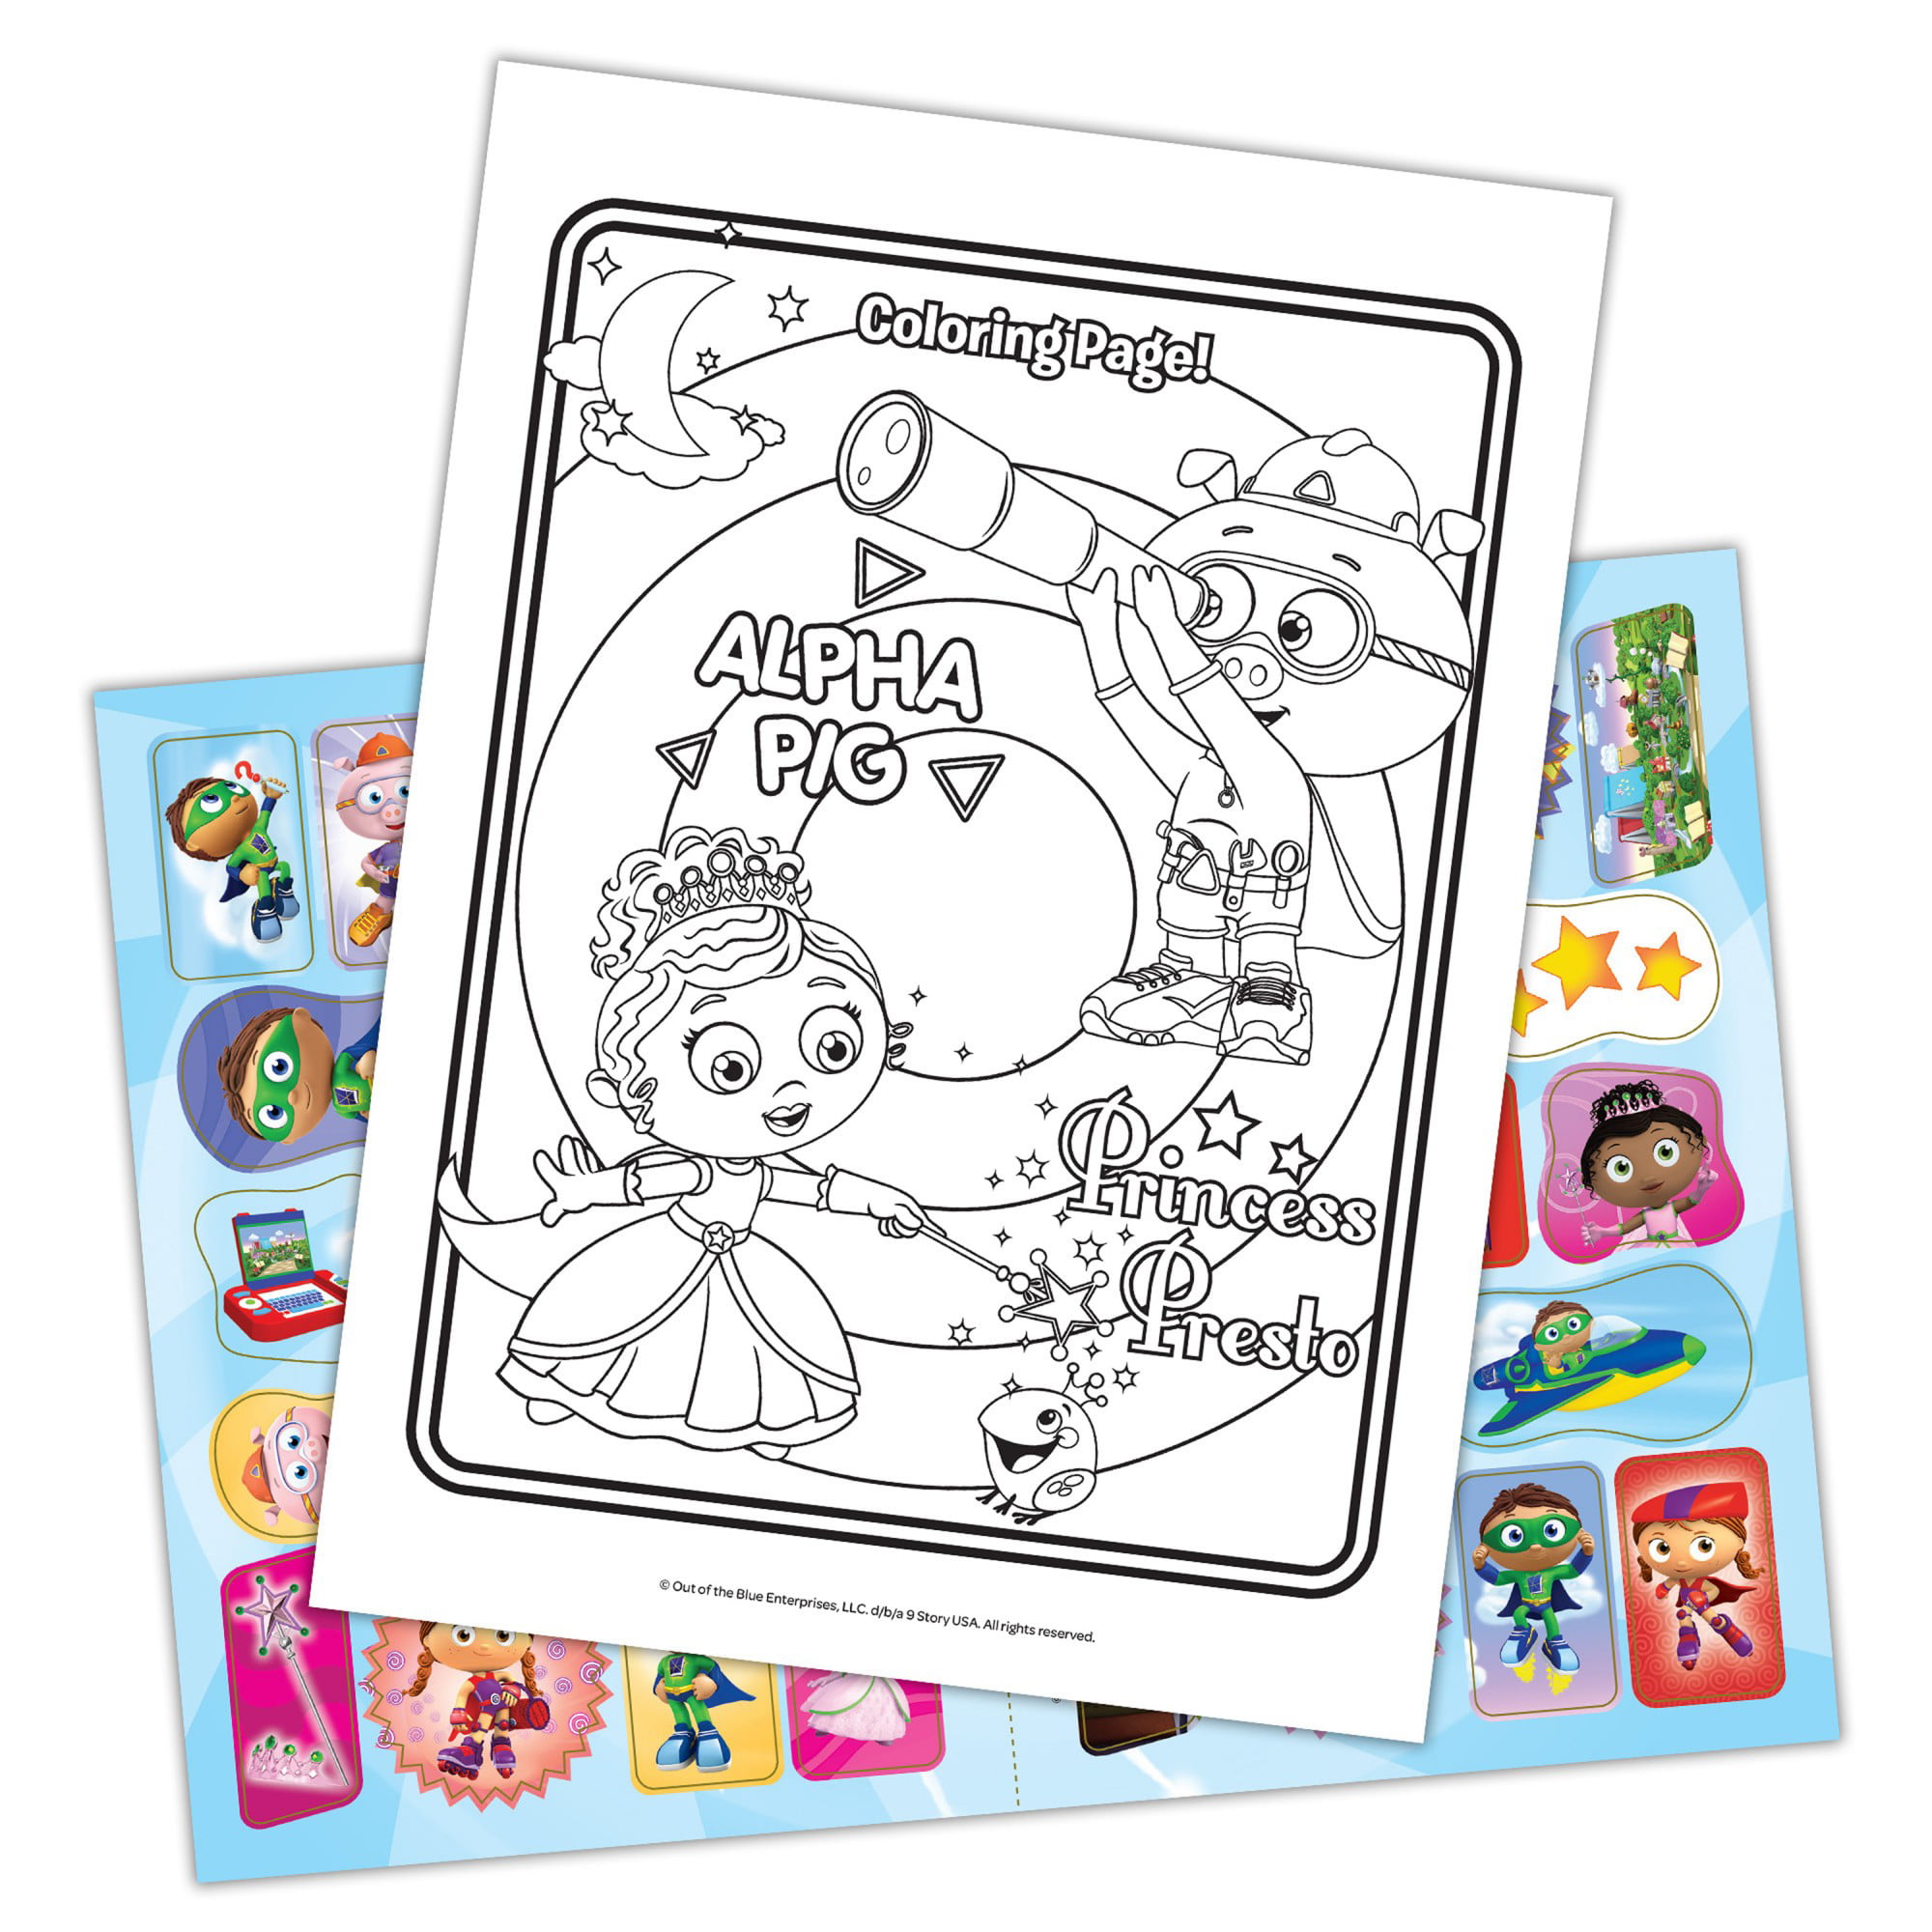 Really Big Coloring Books®  ColoringBook.com expands product offerings  with launch of Brand-New Coloring Book Products for PBS KIDS® Characters